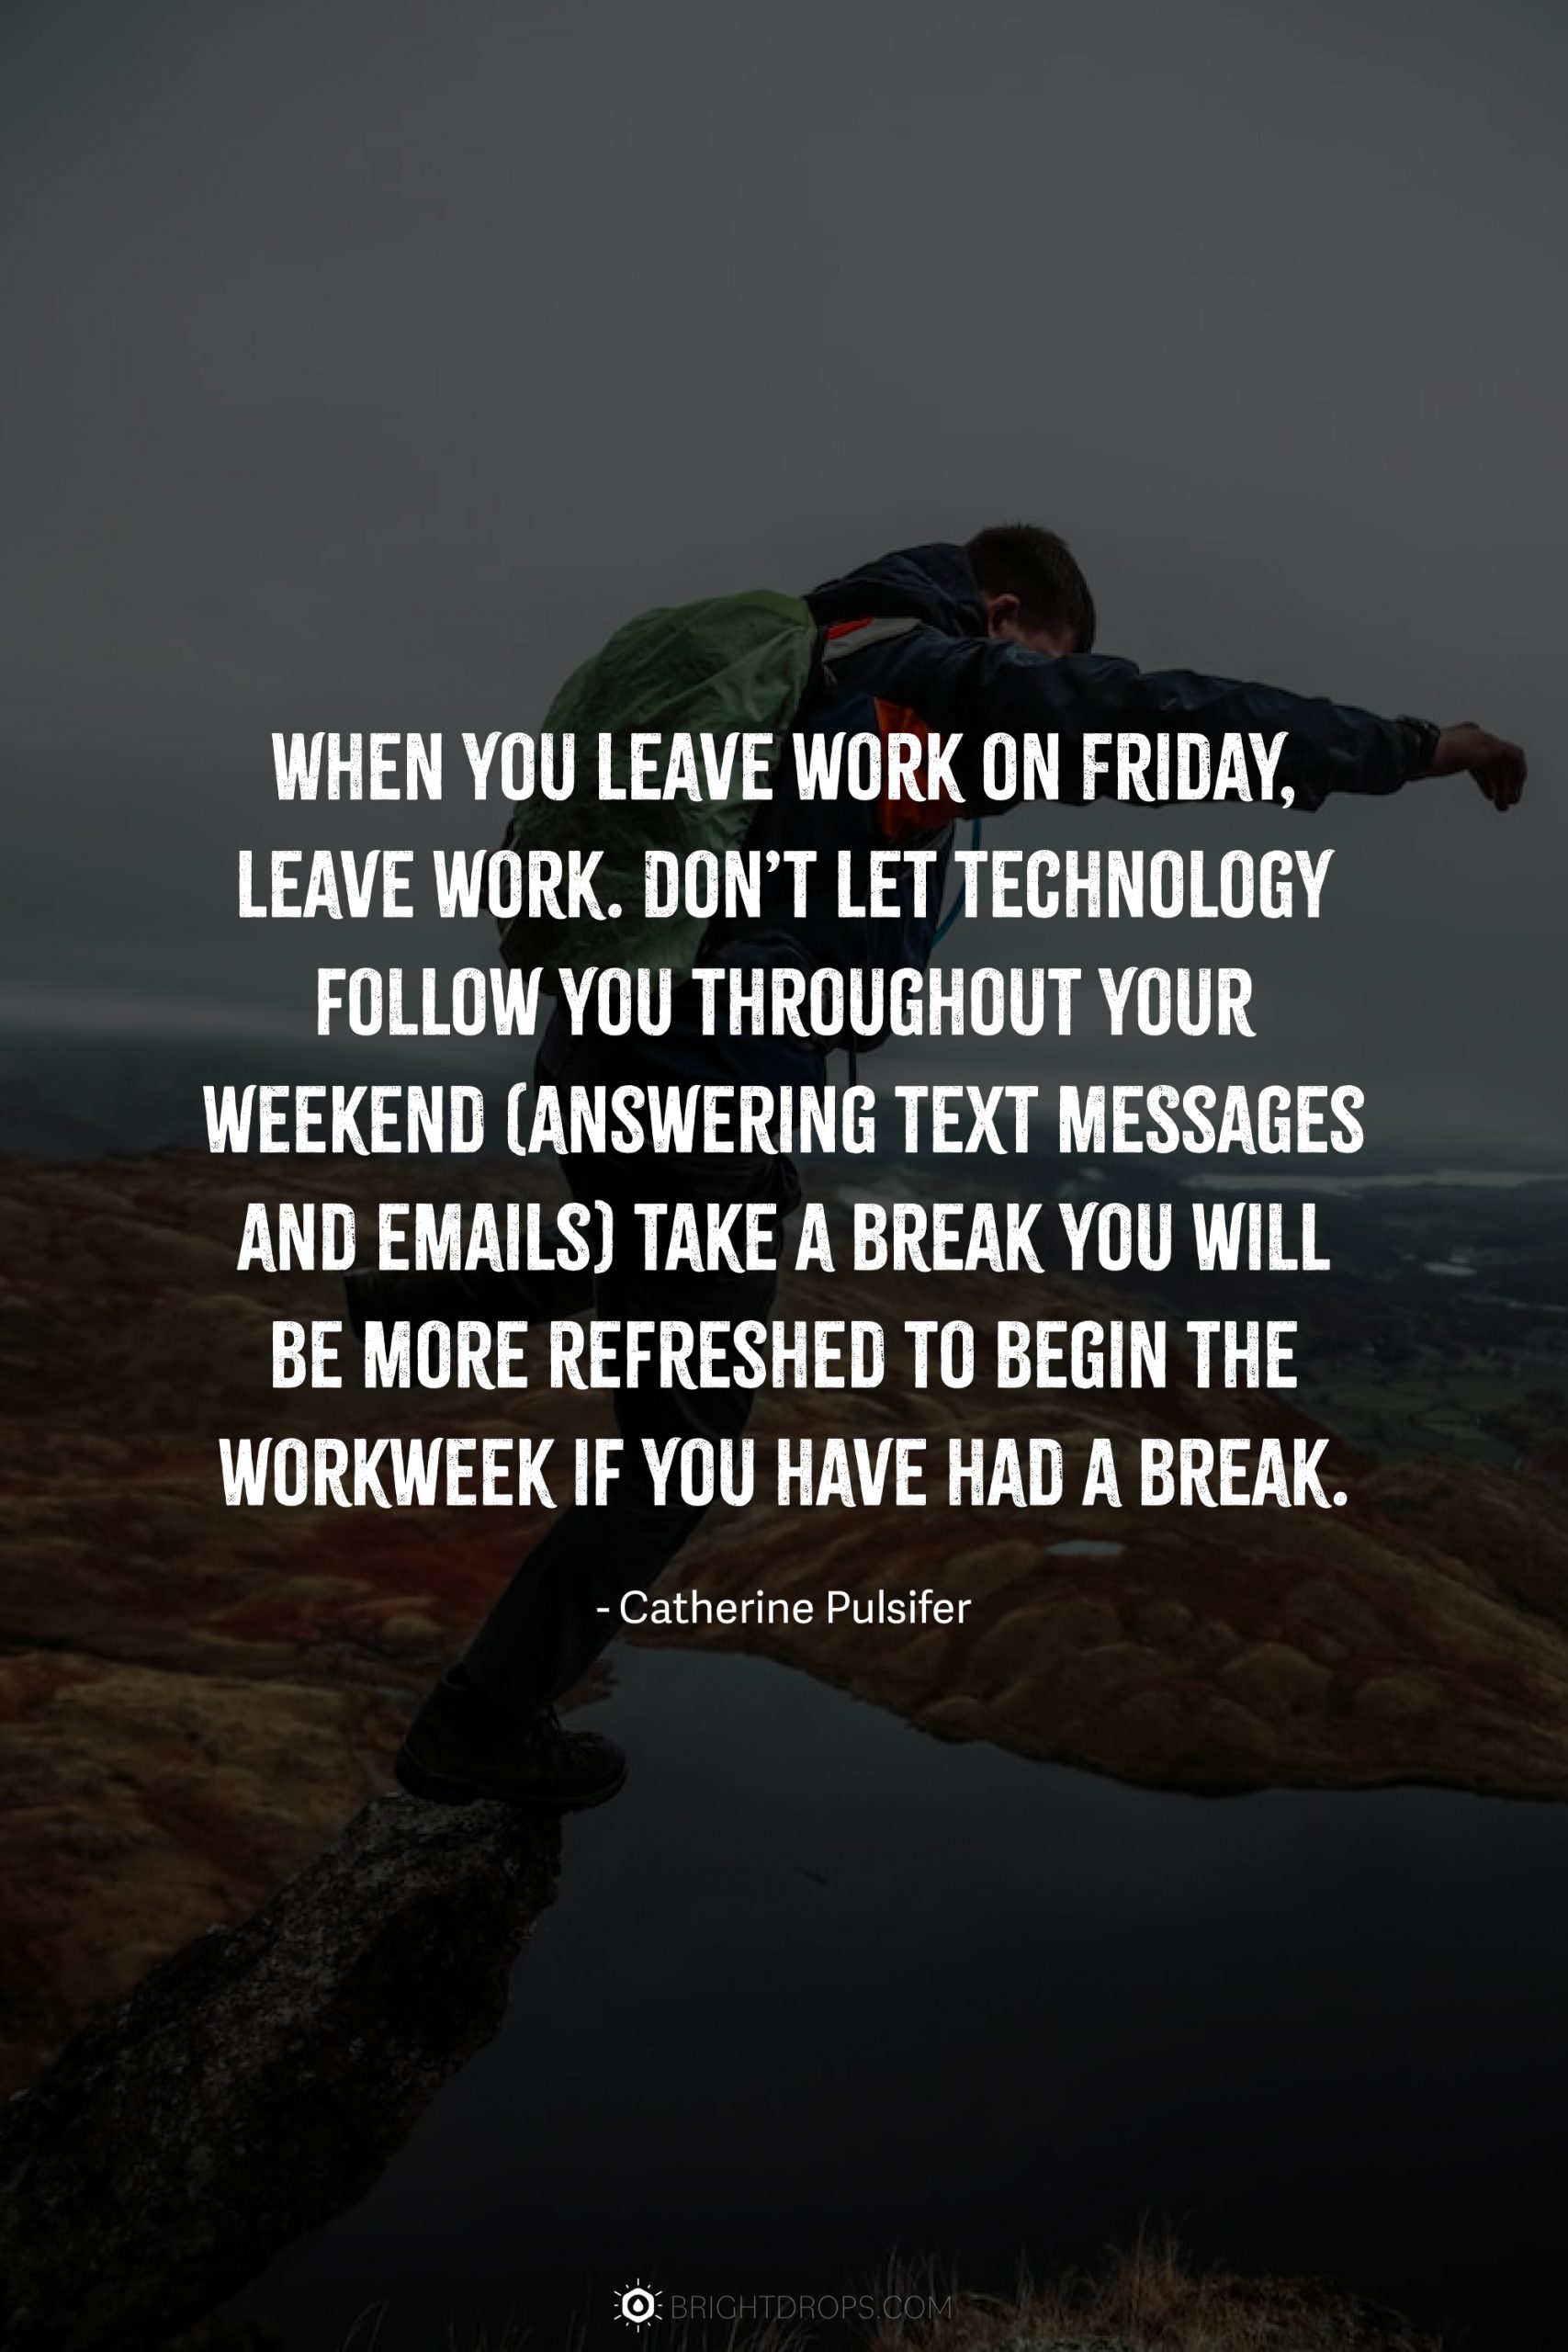 When you leave work on Friday, leave work. Don’t let technology follow you throughout your weekend (answering text messages and emails) take a break you will be more refreshed to begin the workweek if you have had a break.